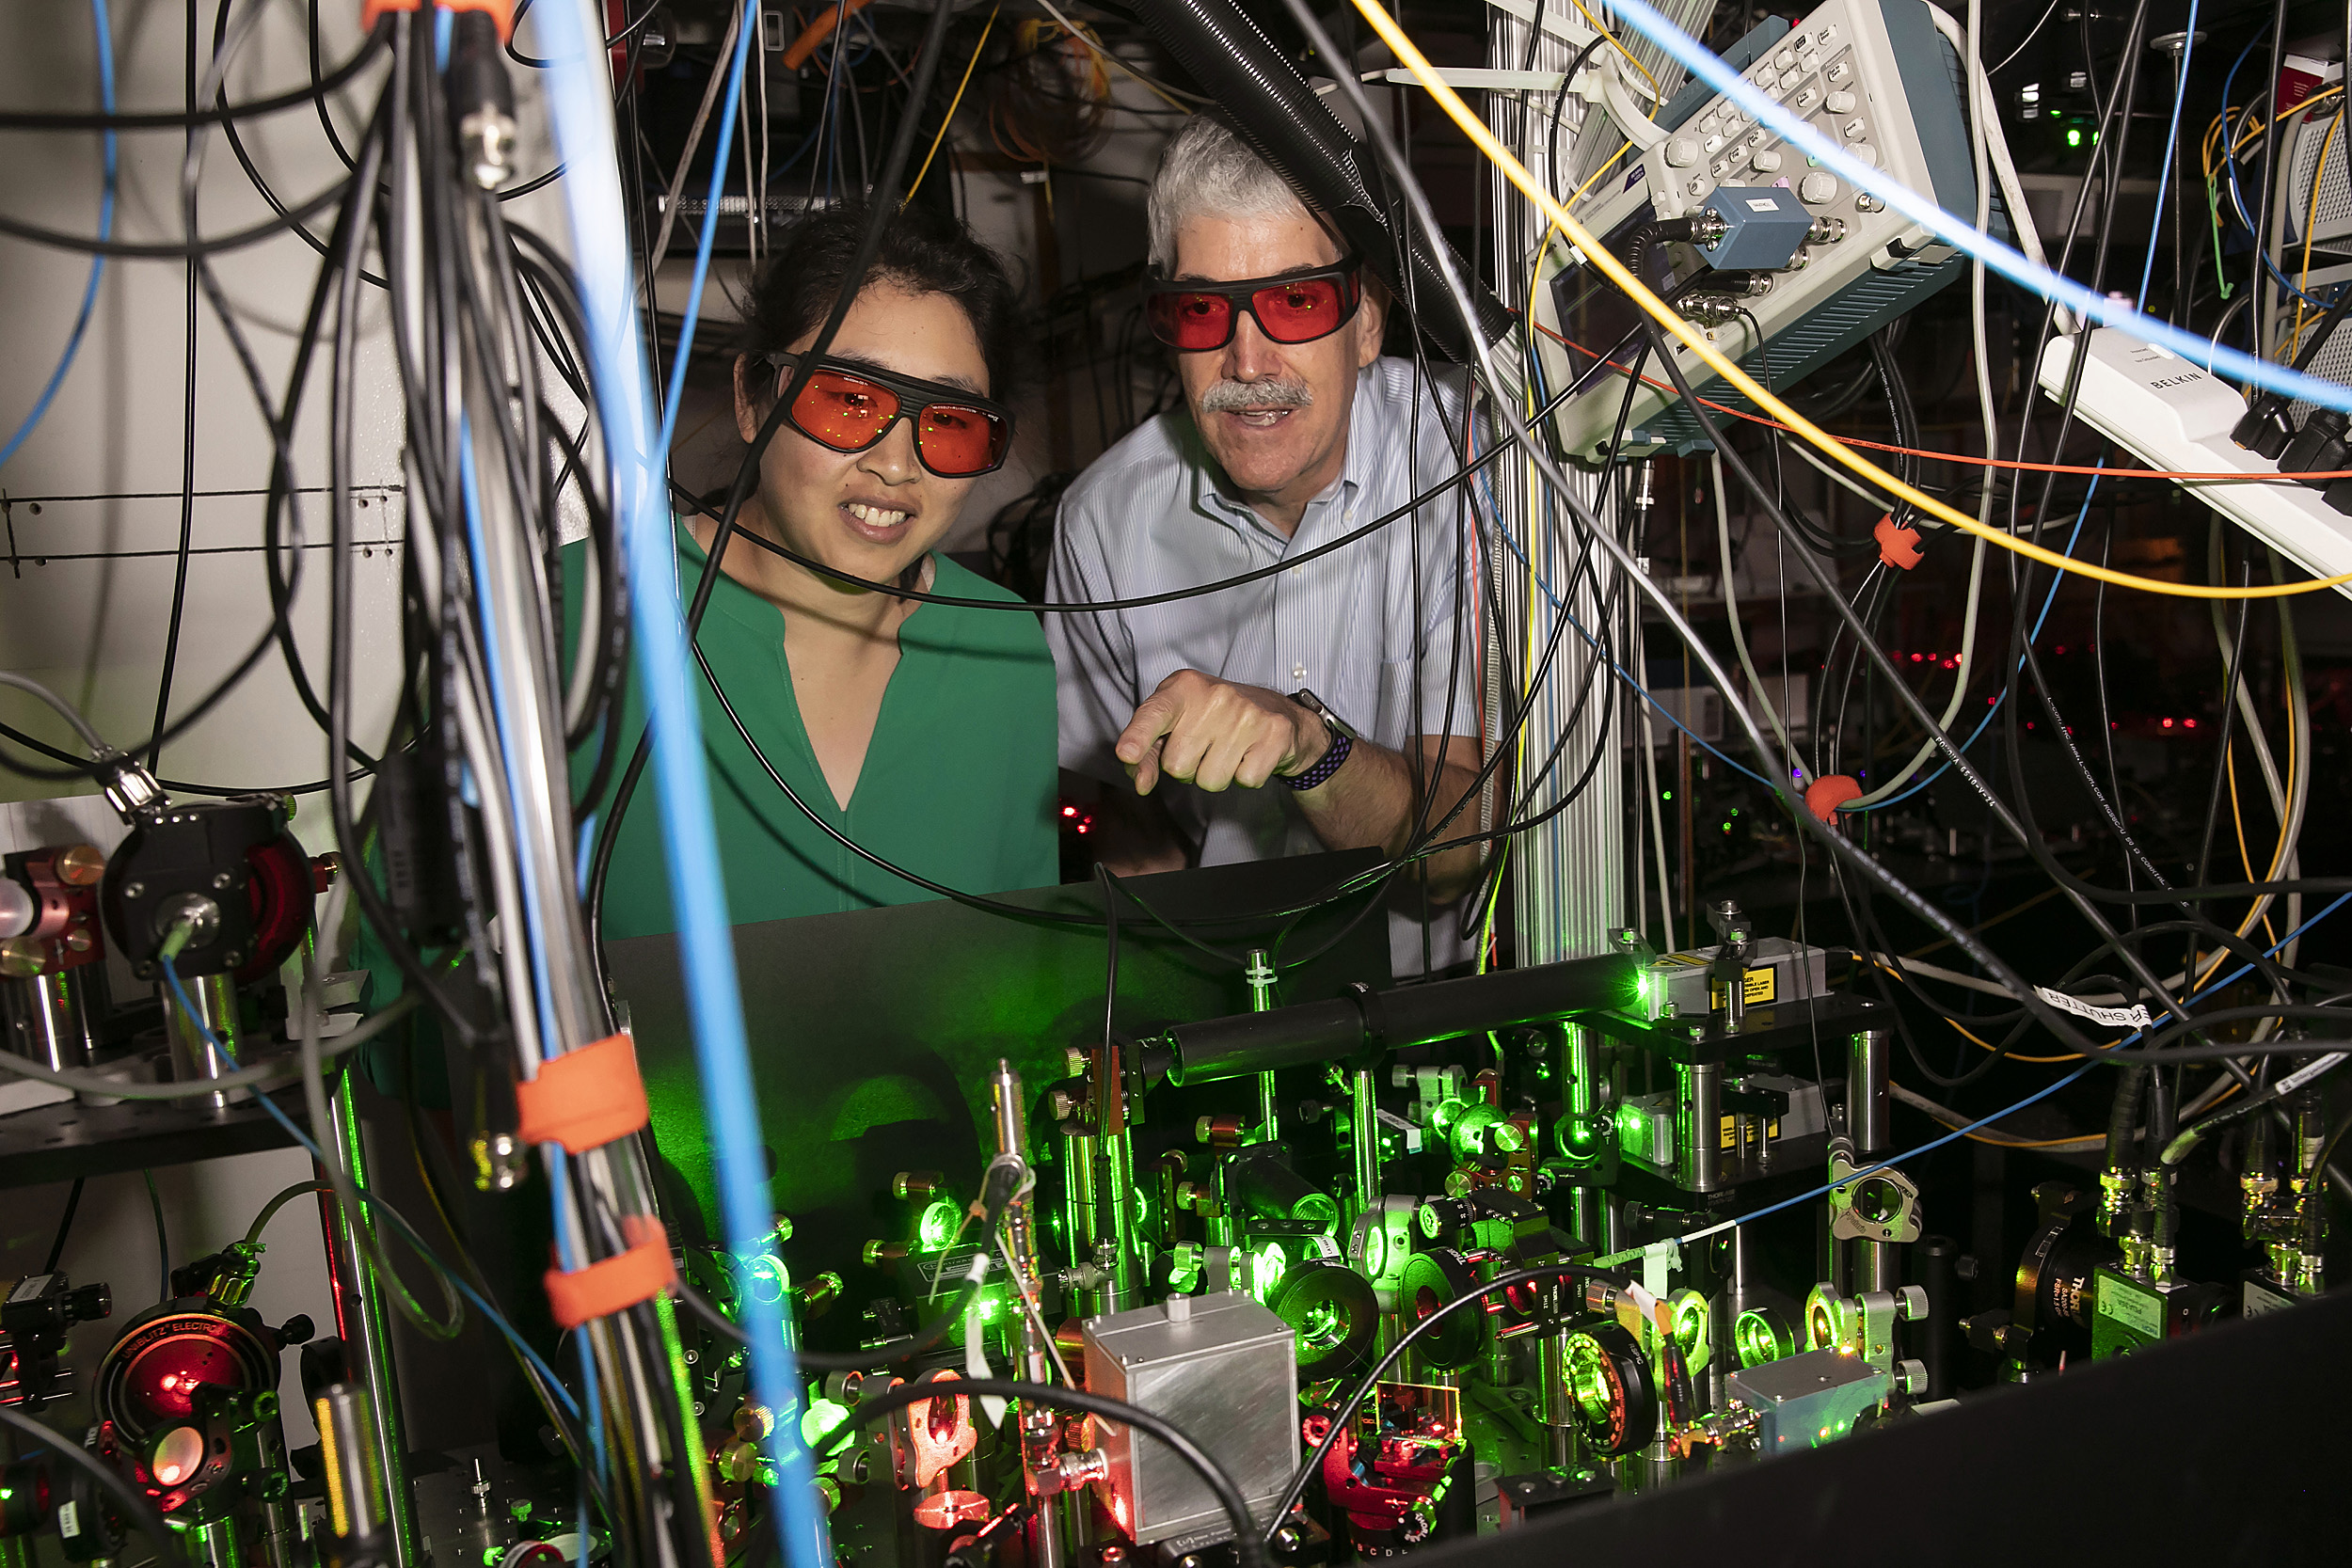 Using precisely focused lasers that act as optical tweezers